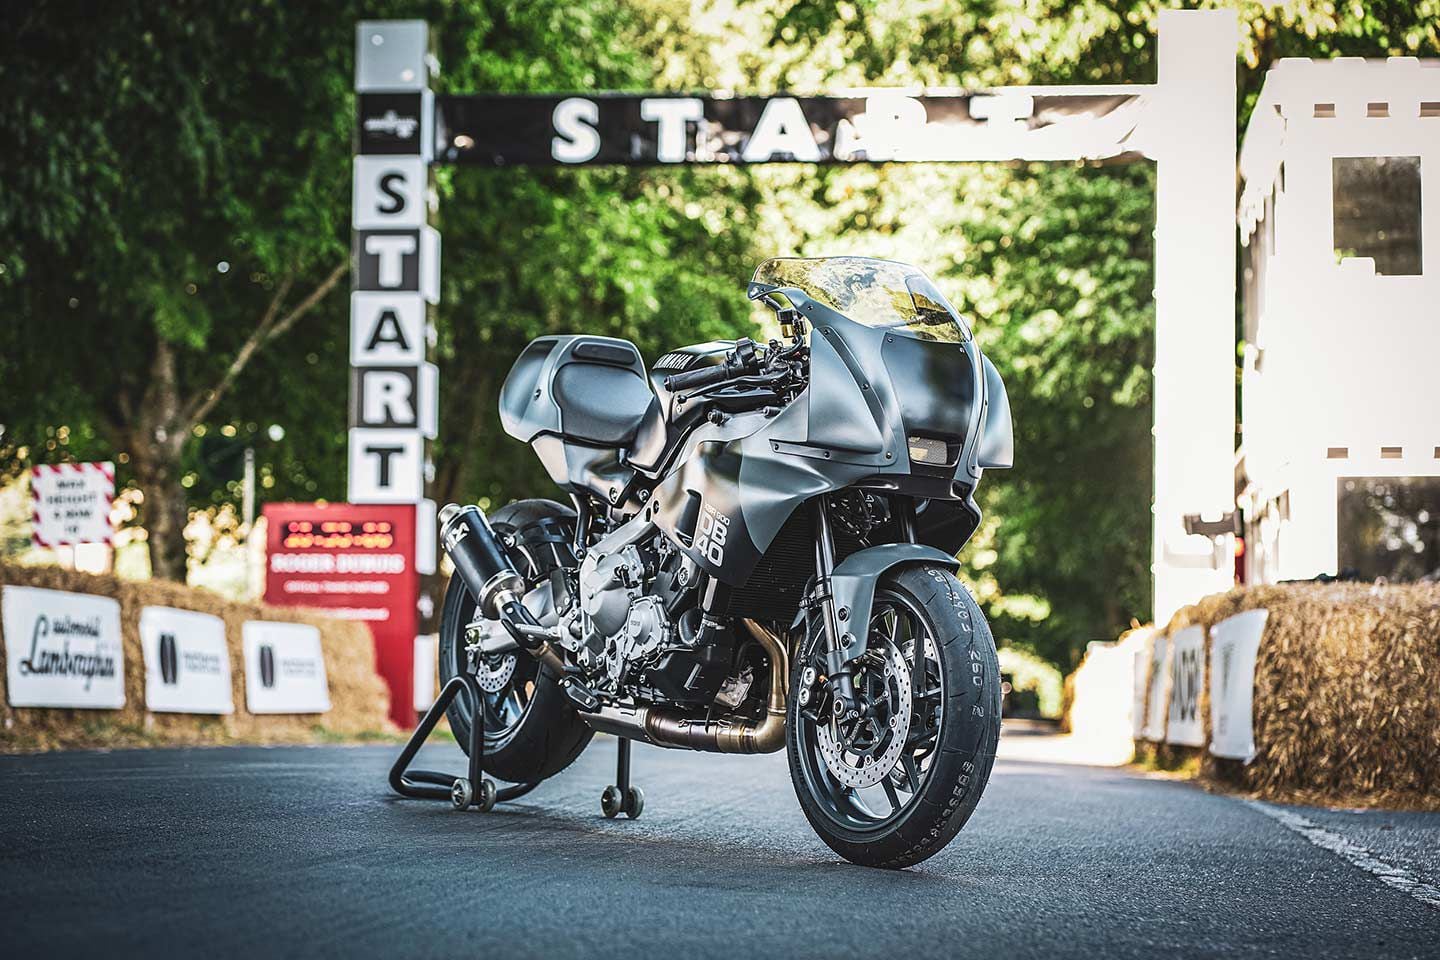 Yamaha’s XSR900 DB40 Prototype was unveiled at the Goodwood Festival of Speed.